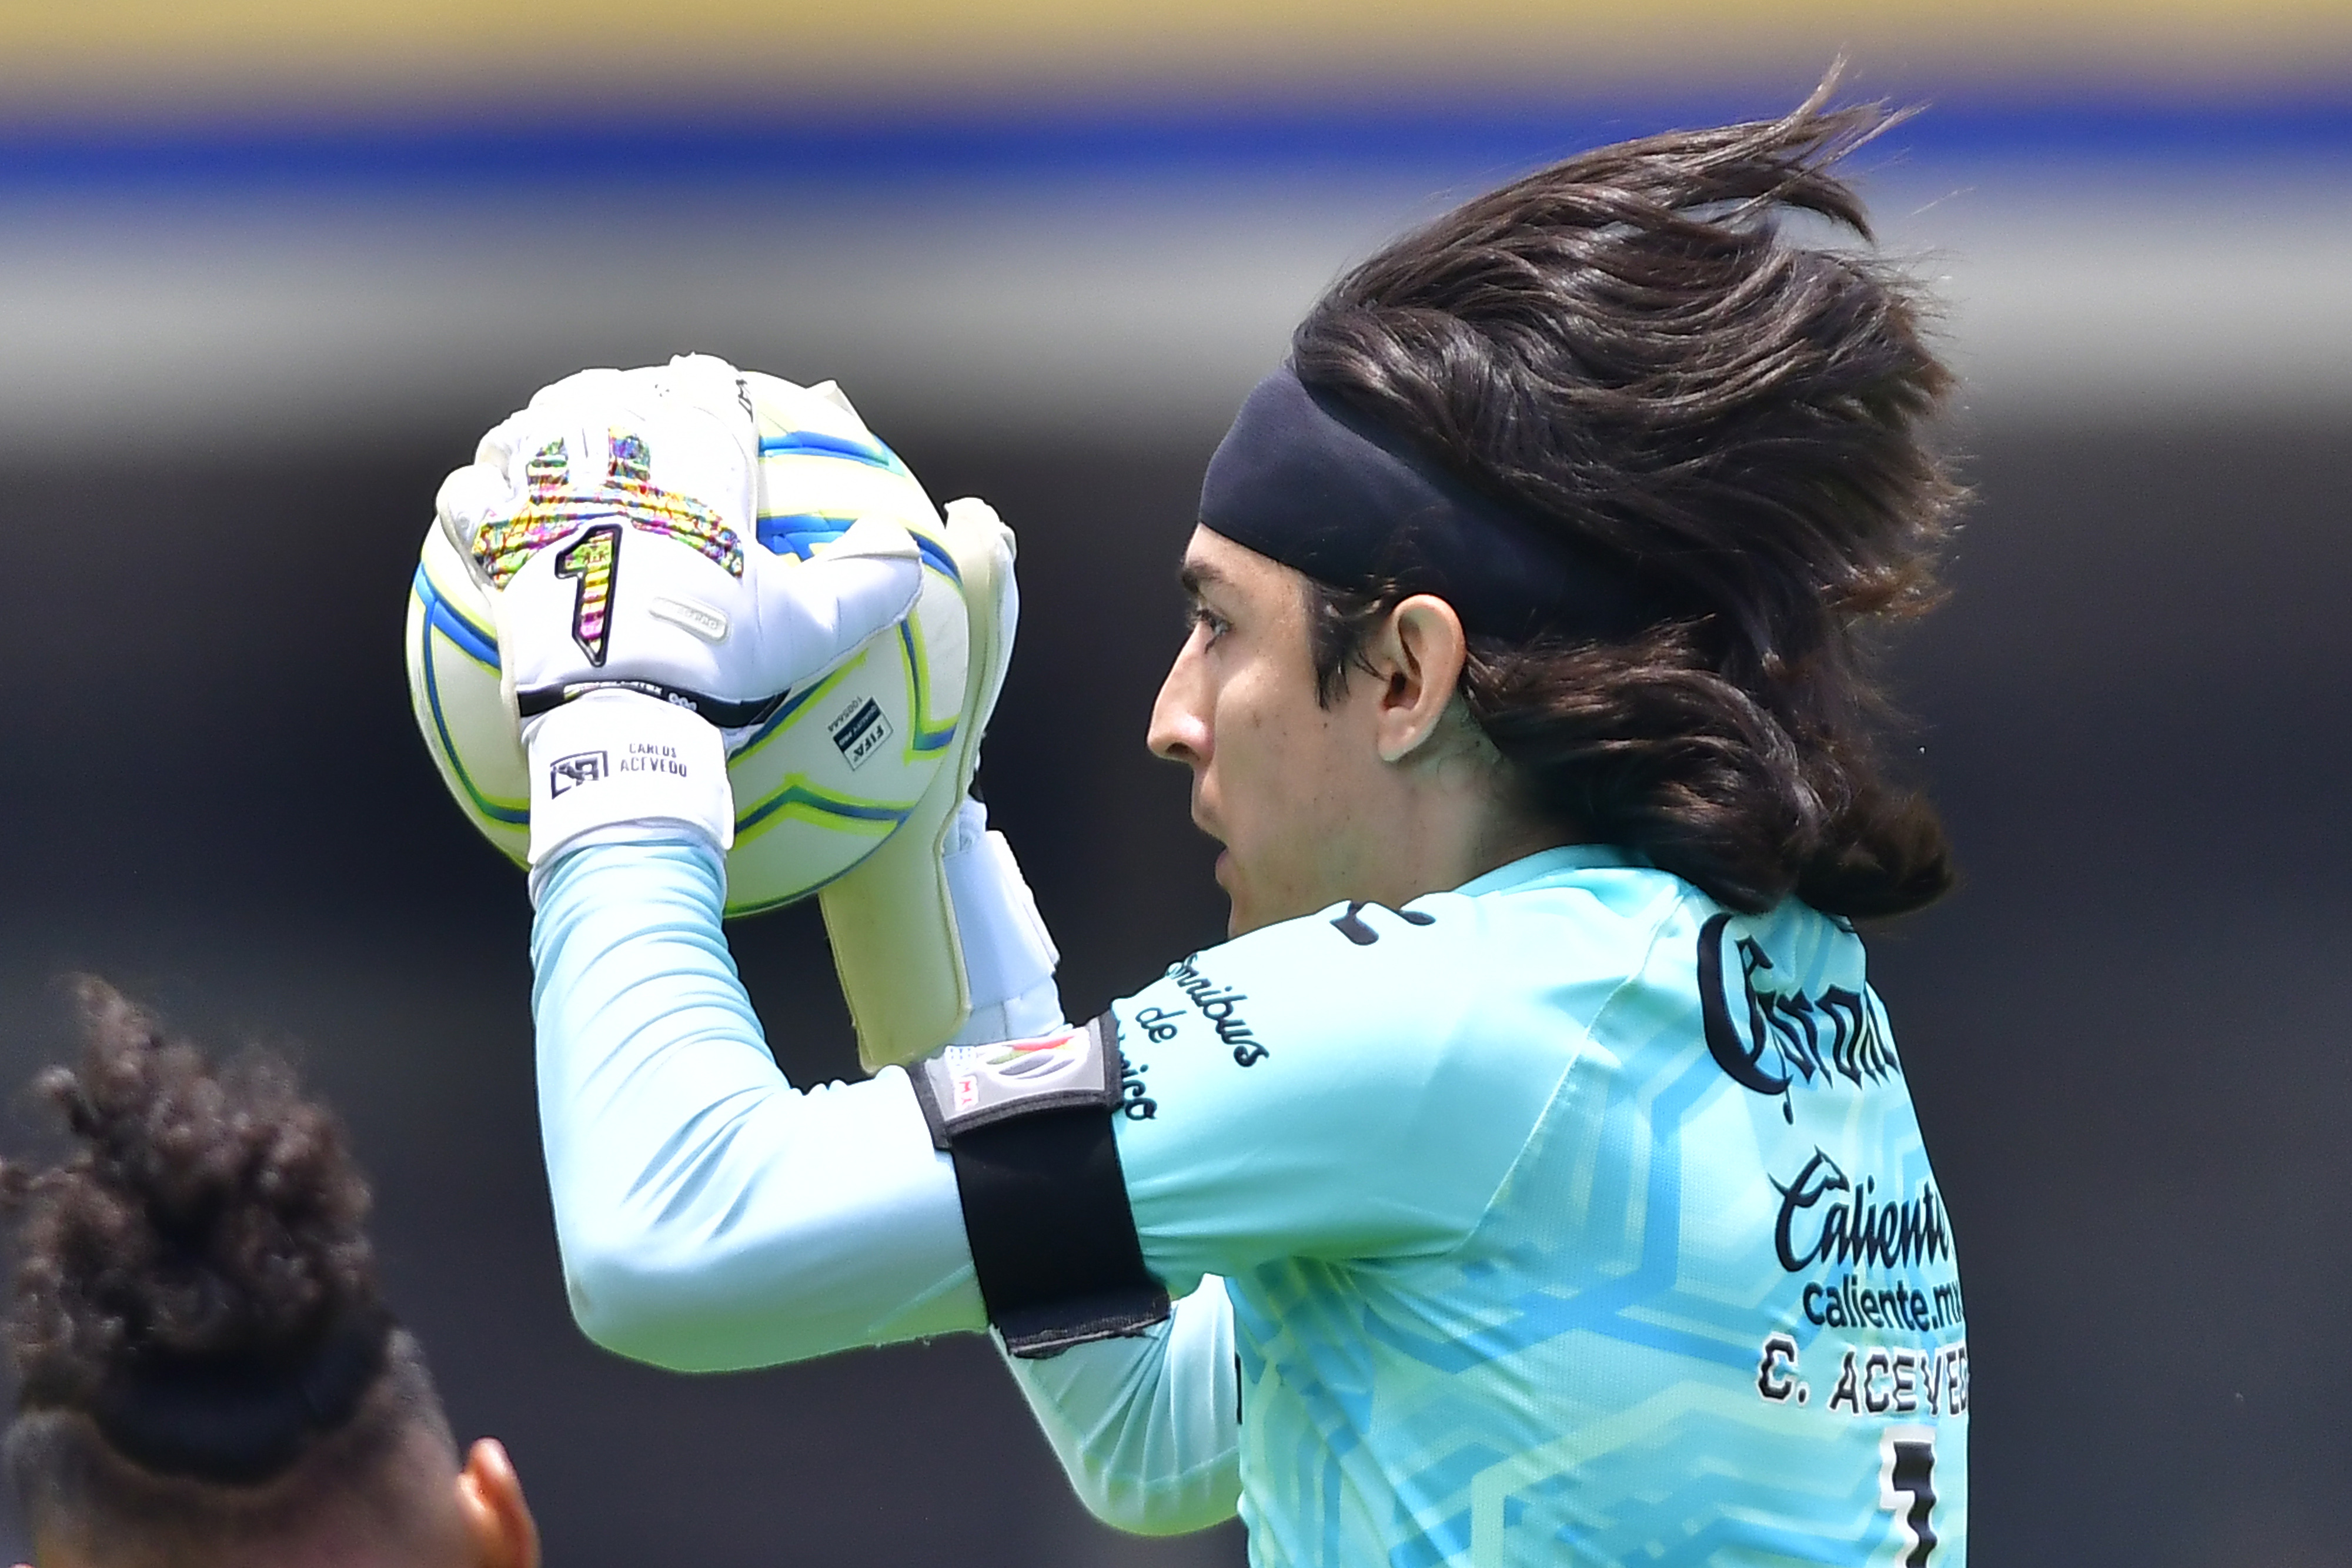 Carlos Acevedo Goalkeeper of Santos holds the ball during the 10th round match between Pumas UNAM and Santos Laguna as part of the Torneo Apertura 2022 Liga MX at Olimpico Universitario Stadium on August 21, 2022 in Mexico City, Mexico.